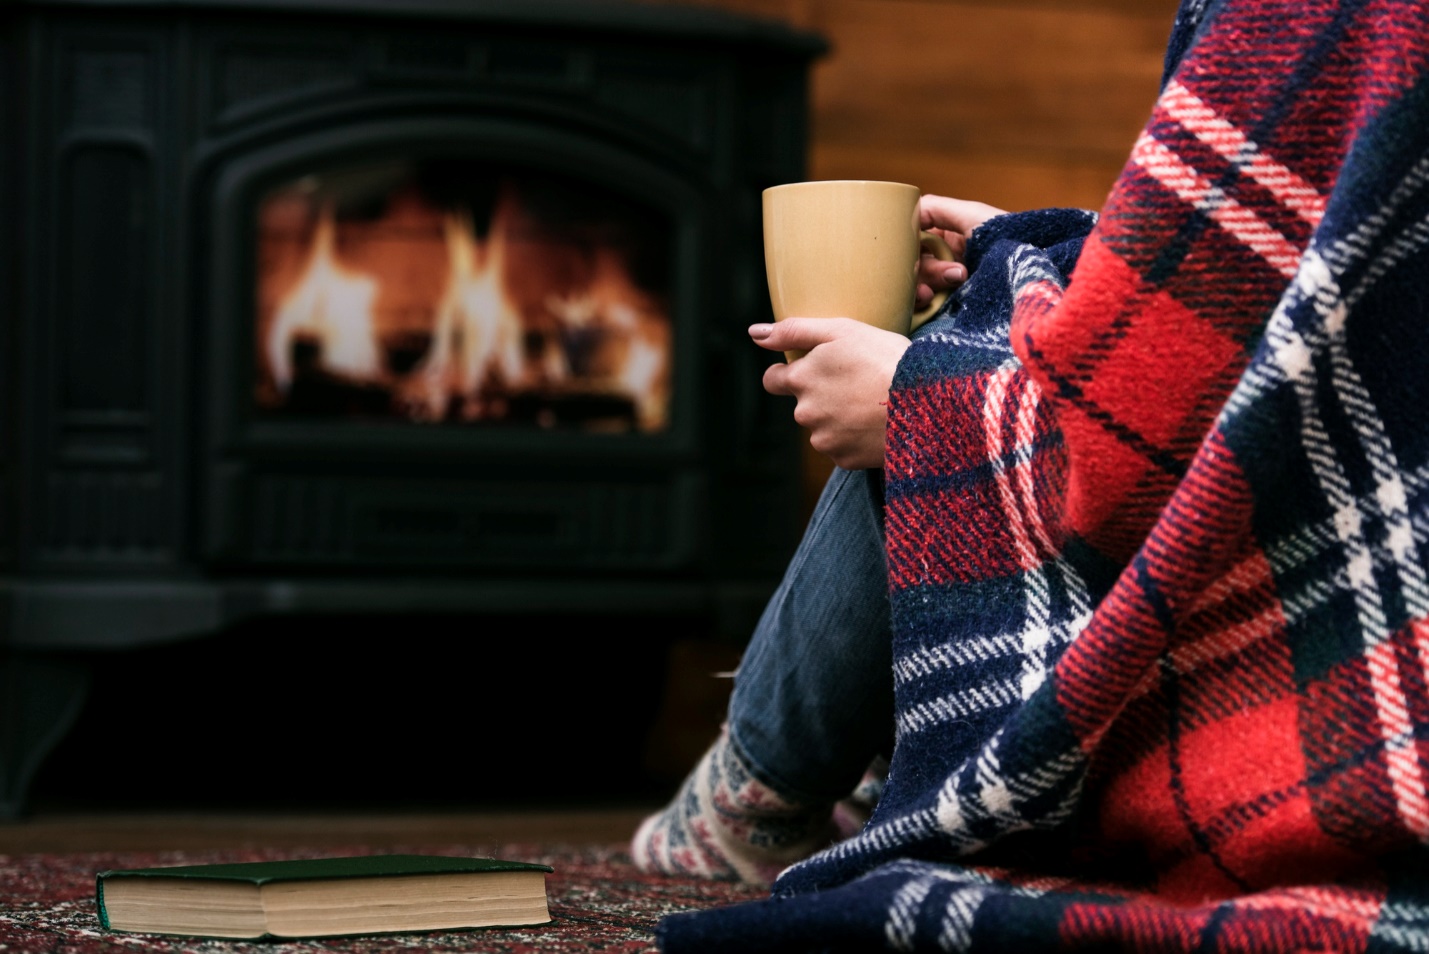 A woman is sitting by a fireplace enjoying a cup of coffee in Mississauga during winter.